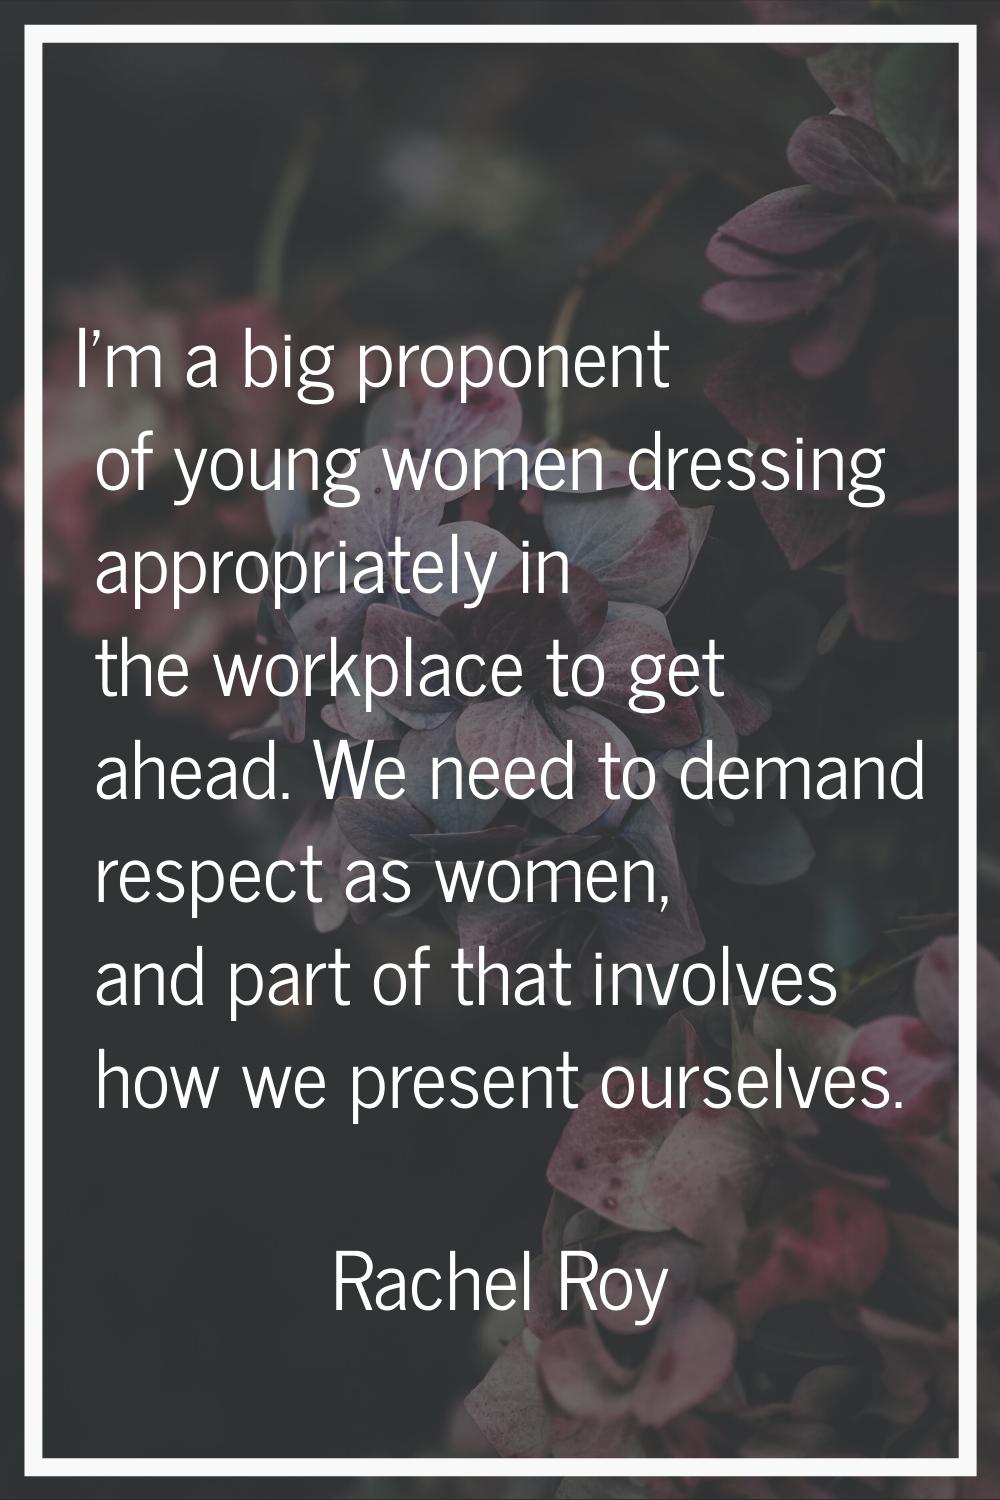 I'm a big proponent of young women dressing appropriately in the workplace to get ahead. We need to